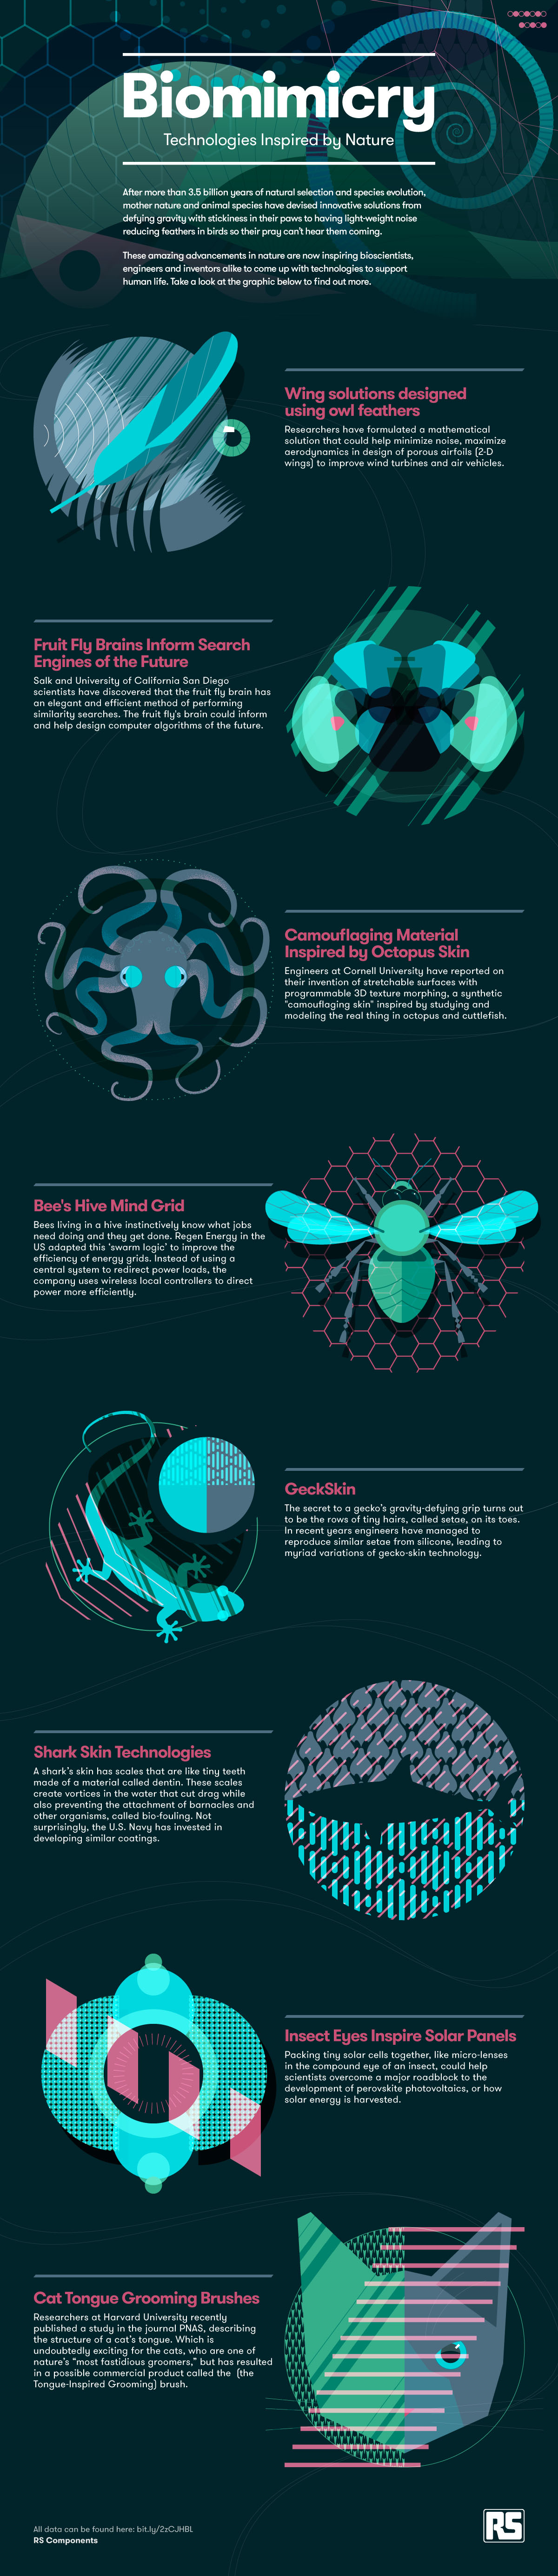 Biomimicry: Technology Inspired by Nature